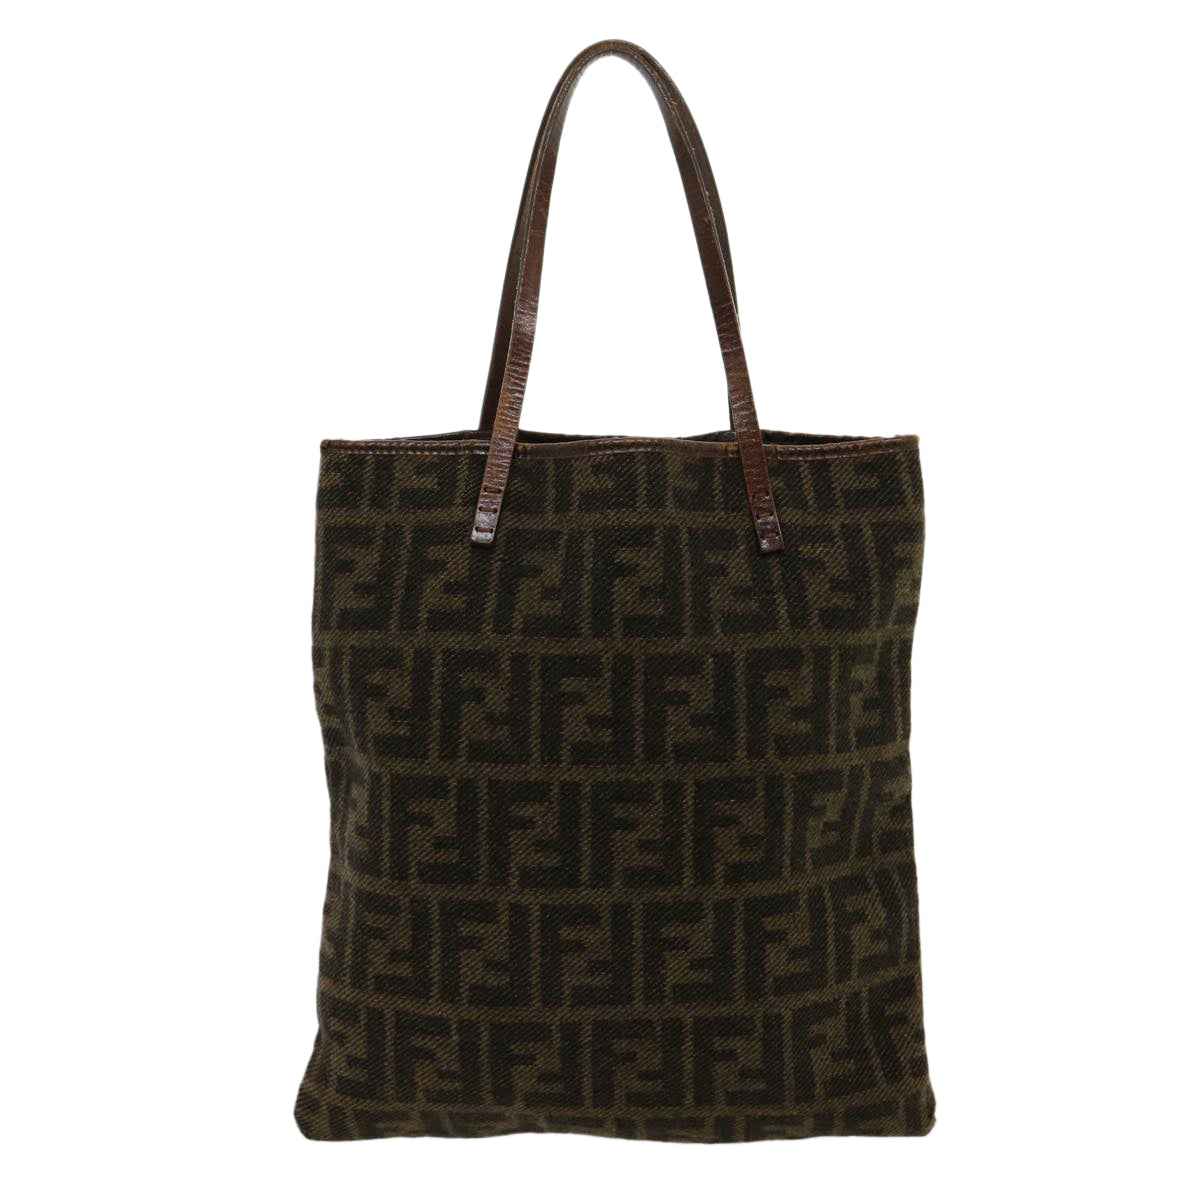 FENDI Zucca Canvas Tote Bag Wool Brown Auth am2733g